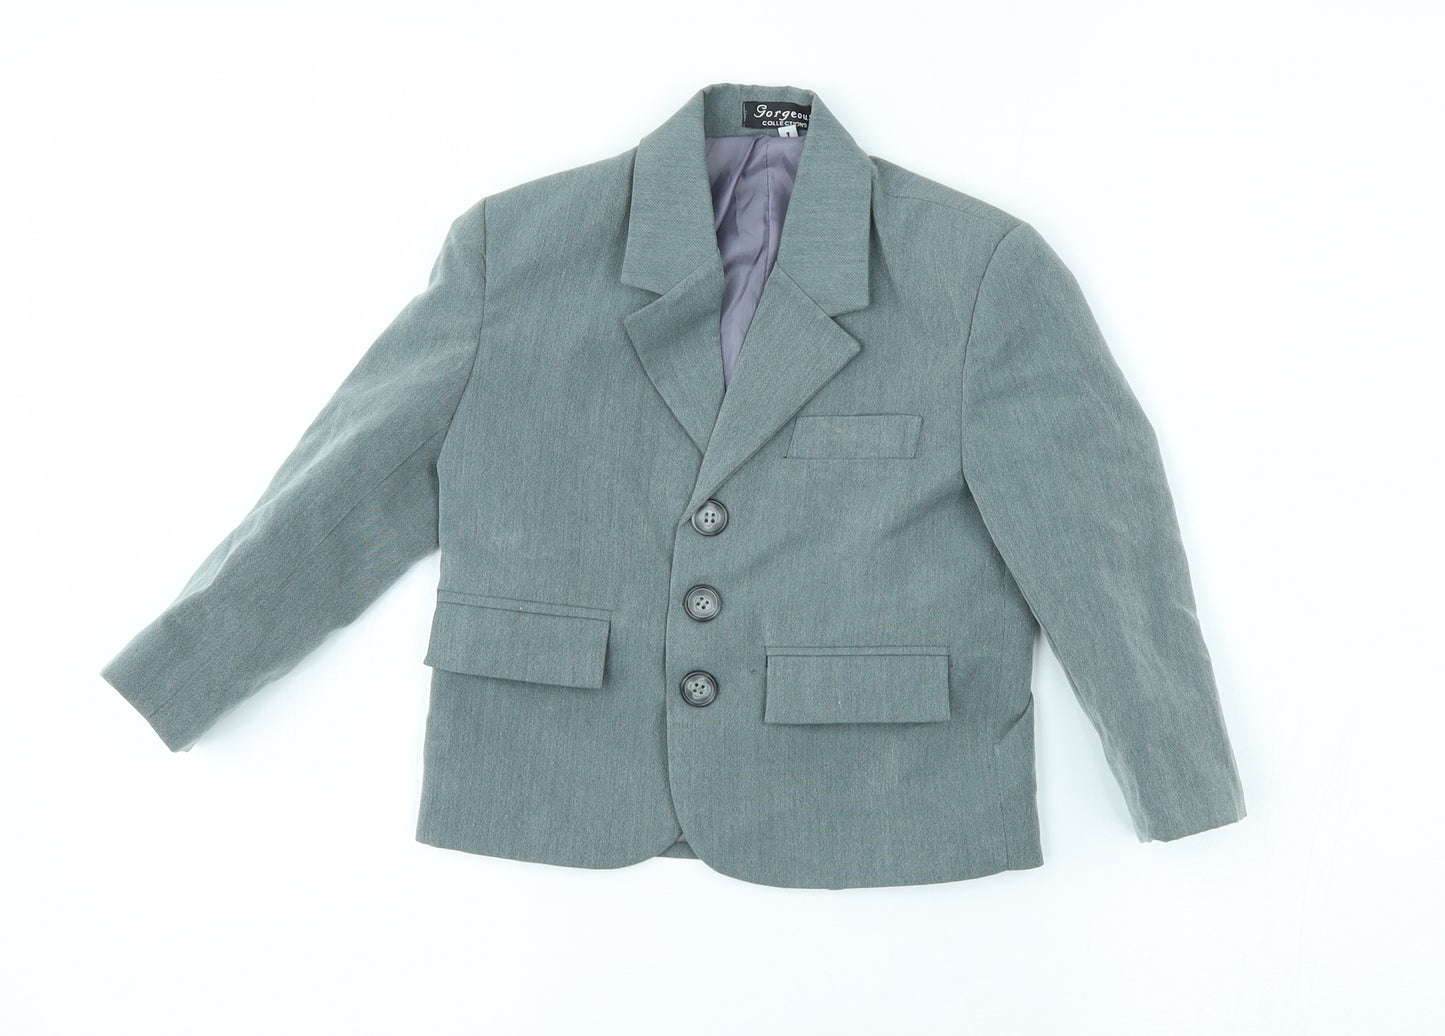 Gorgeous collections Baby Grey   Trouser Suit Blazer Size 12 Months